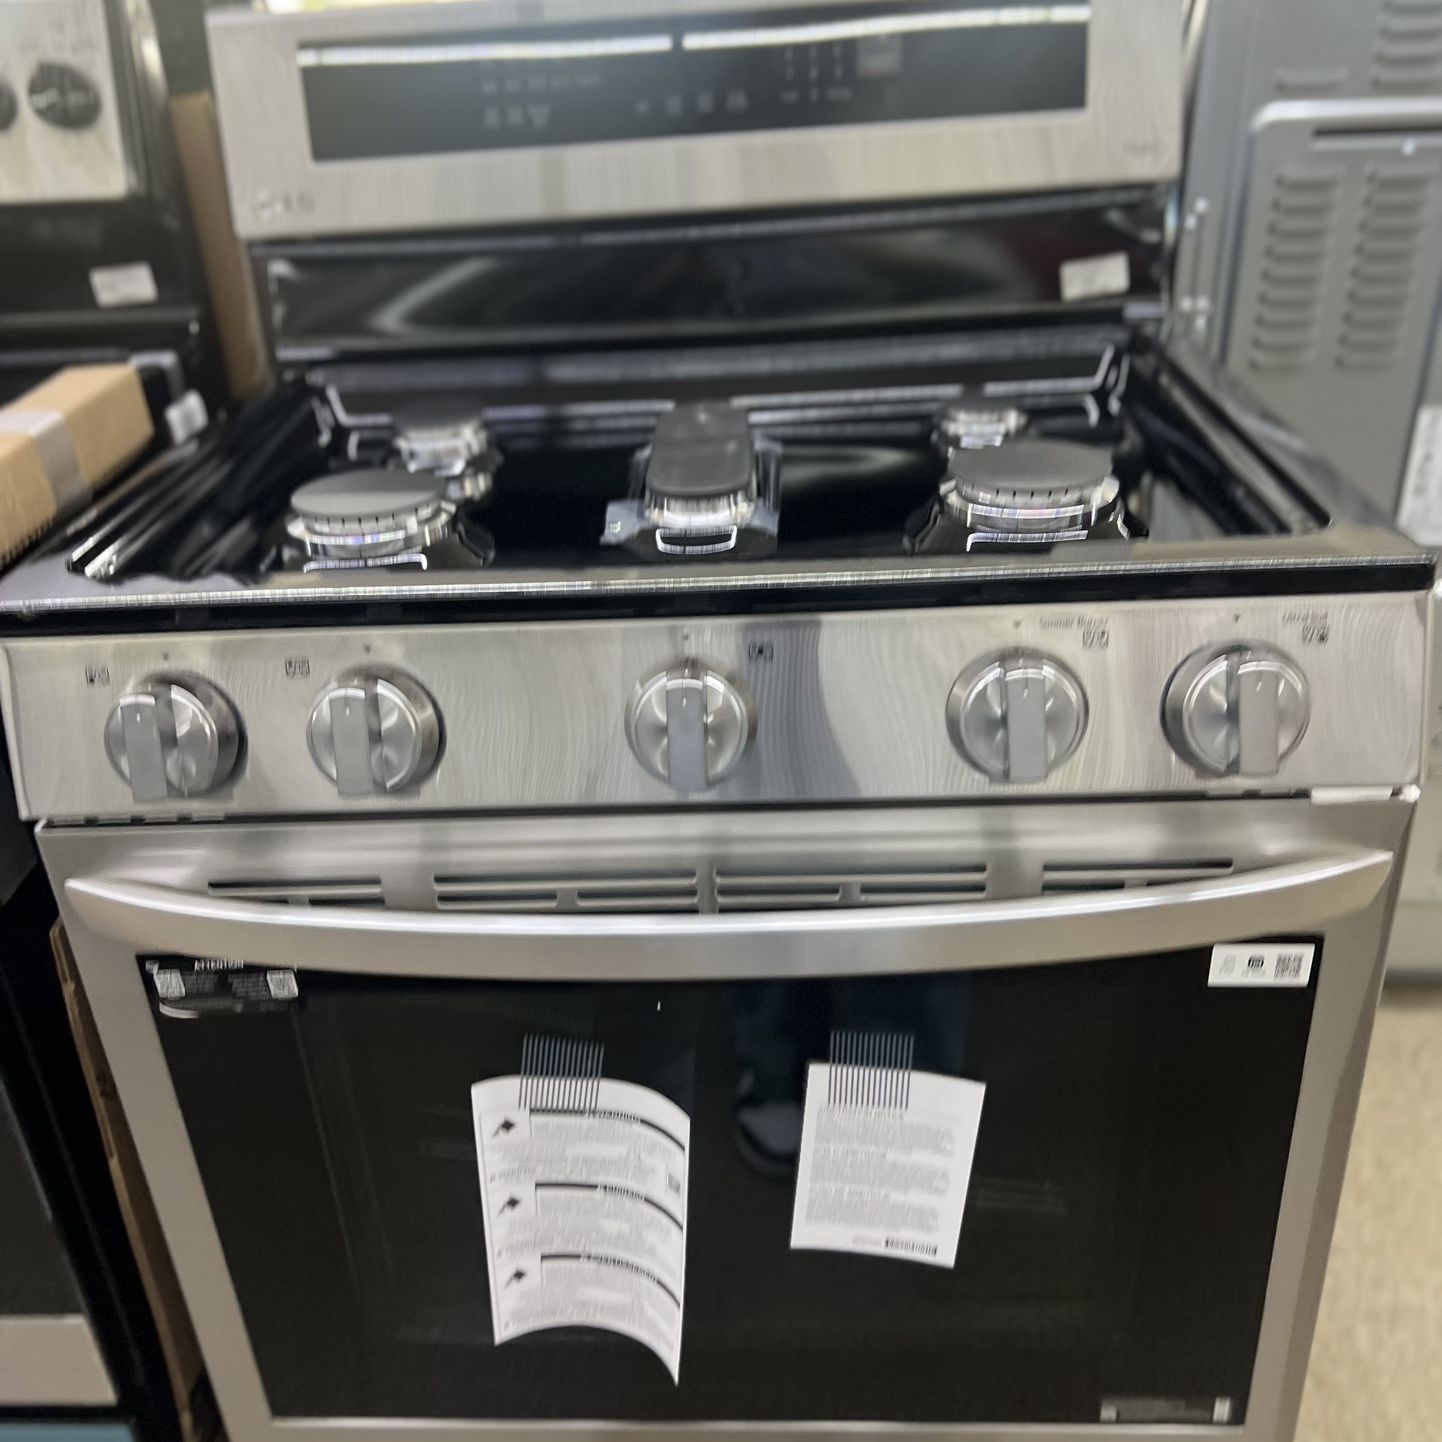 LG Gas Range Stainless Steel $10 Down Convection Bake